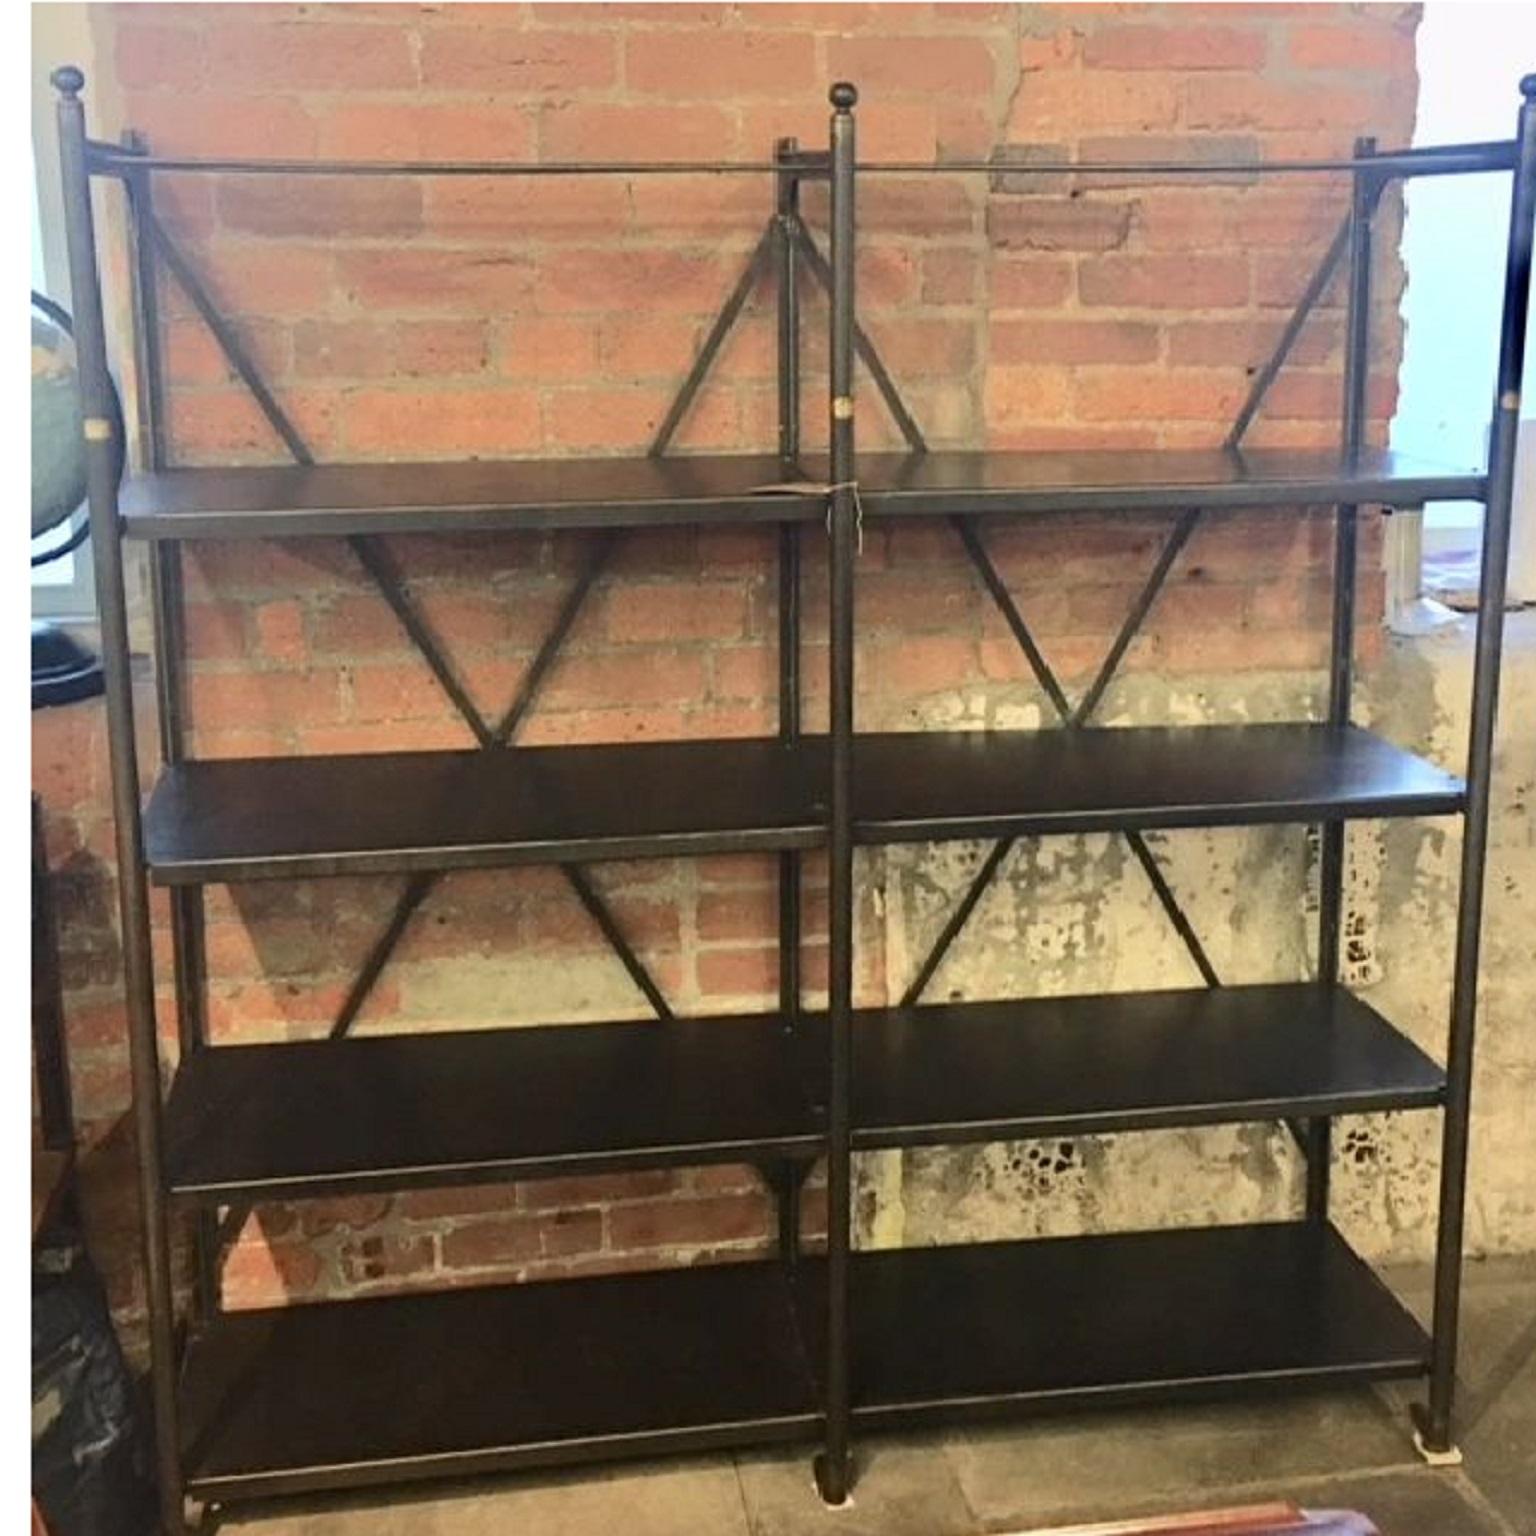 industrial shelving units